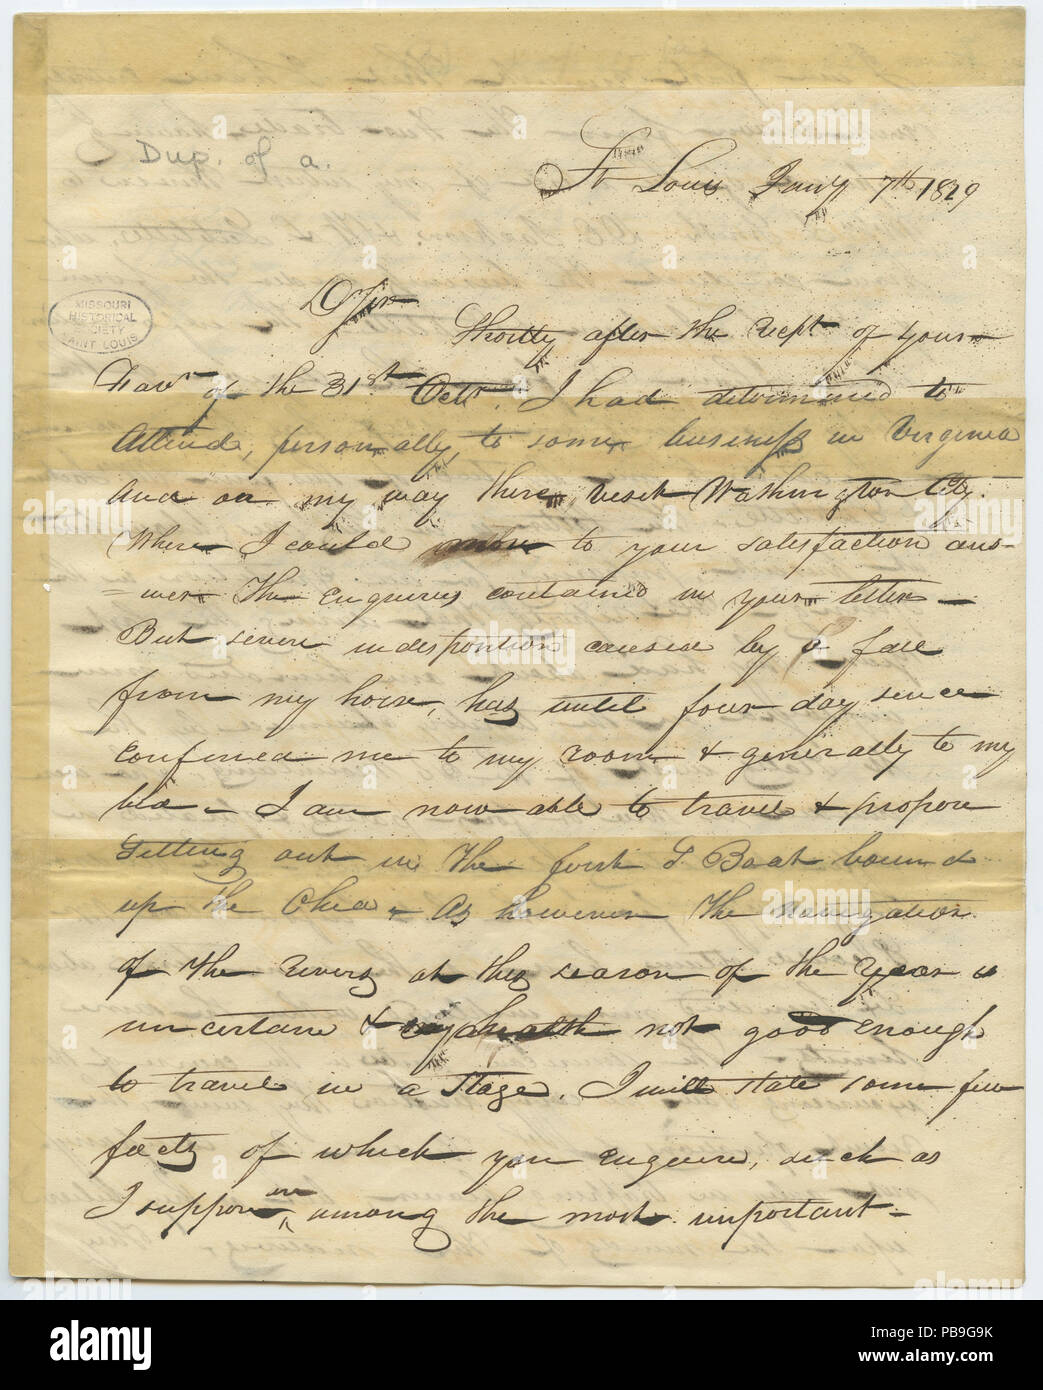 905 Letter of William H. Ashley to dear sir, January 7, 1829 Stock Photo